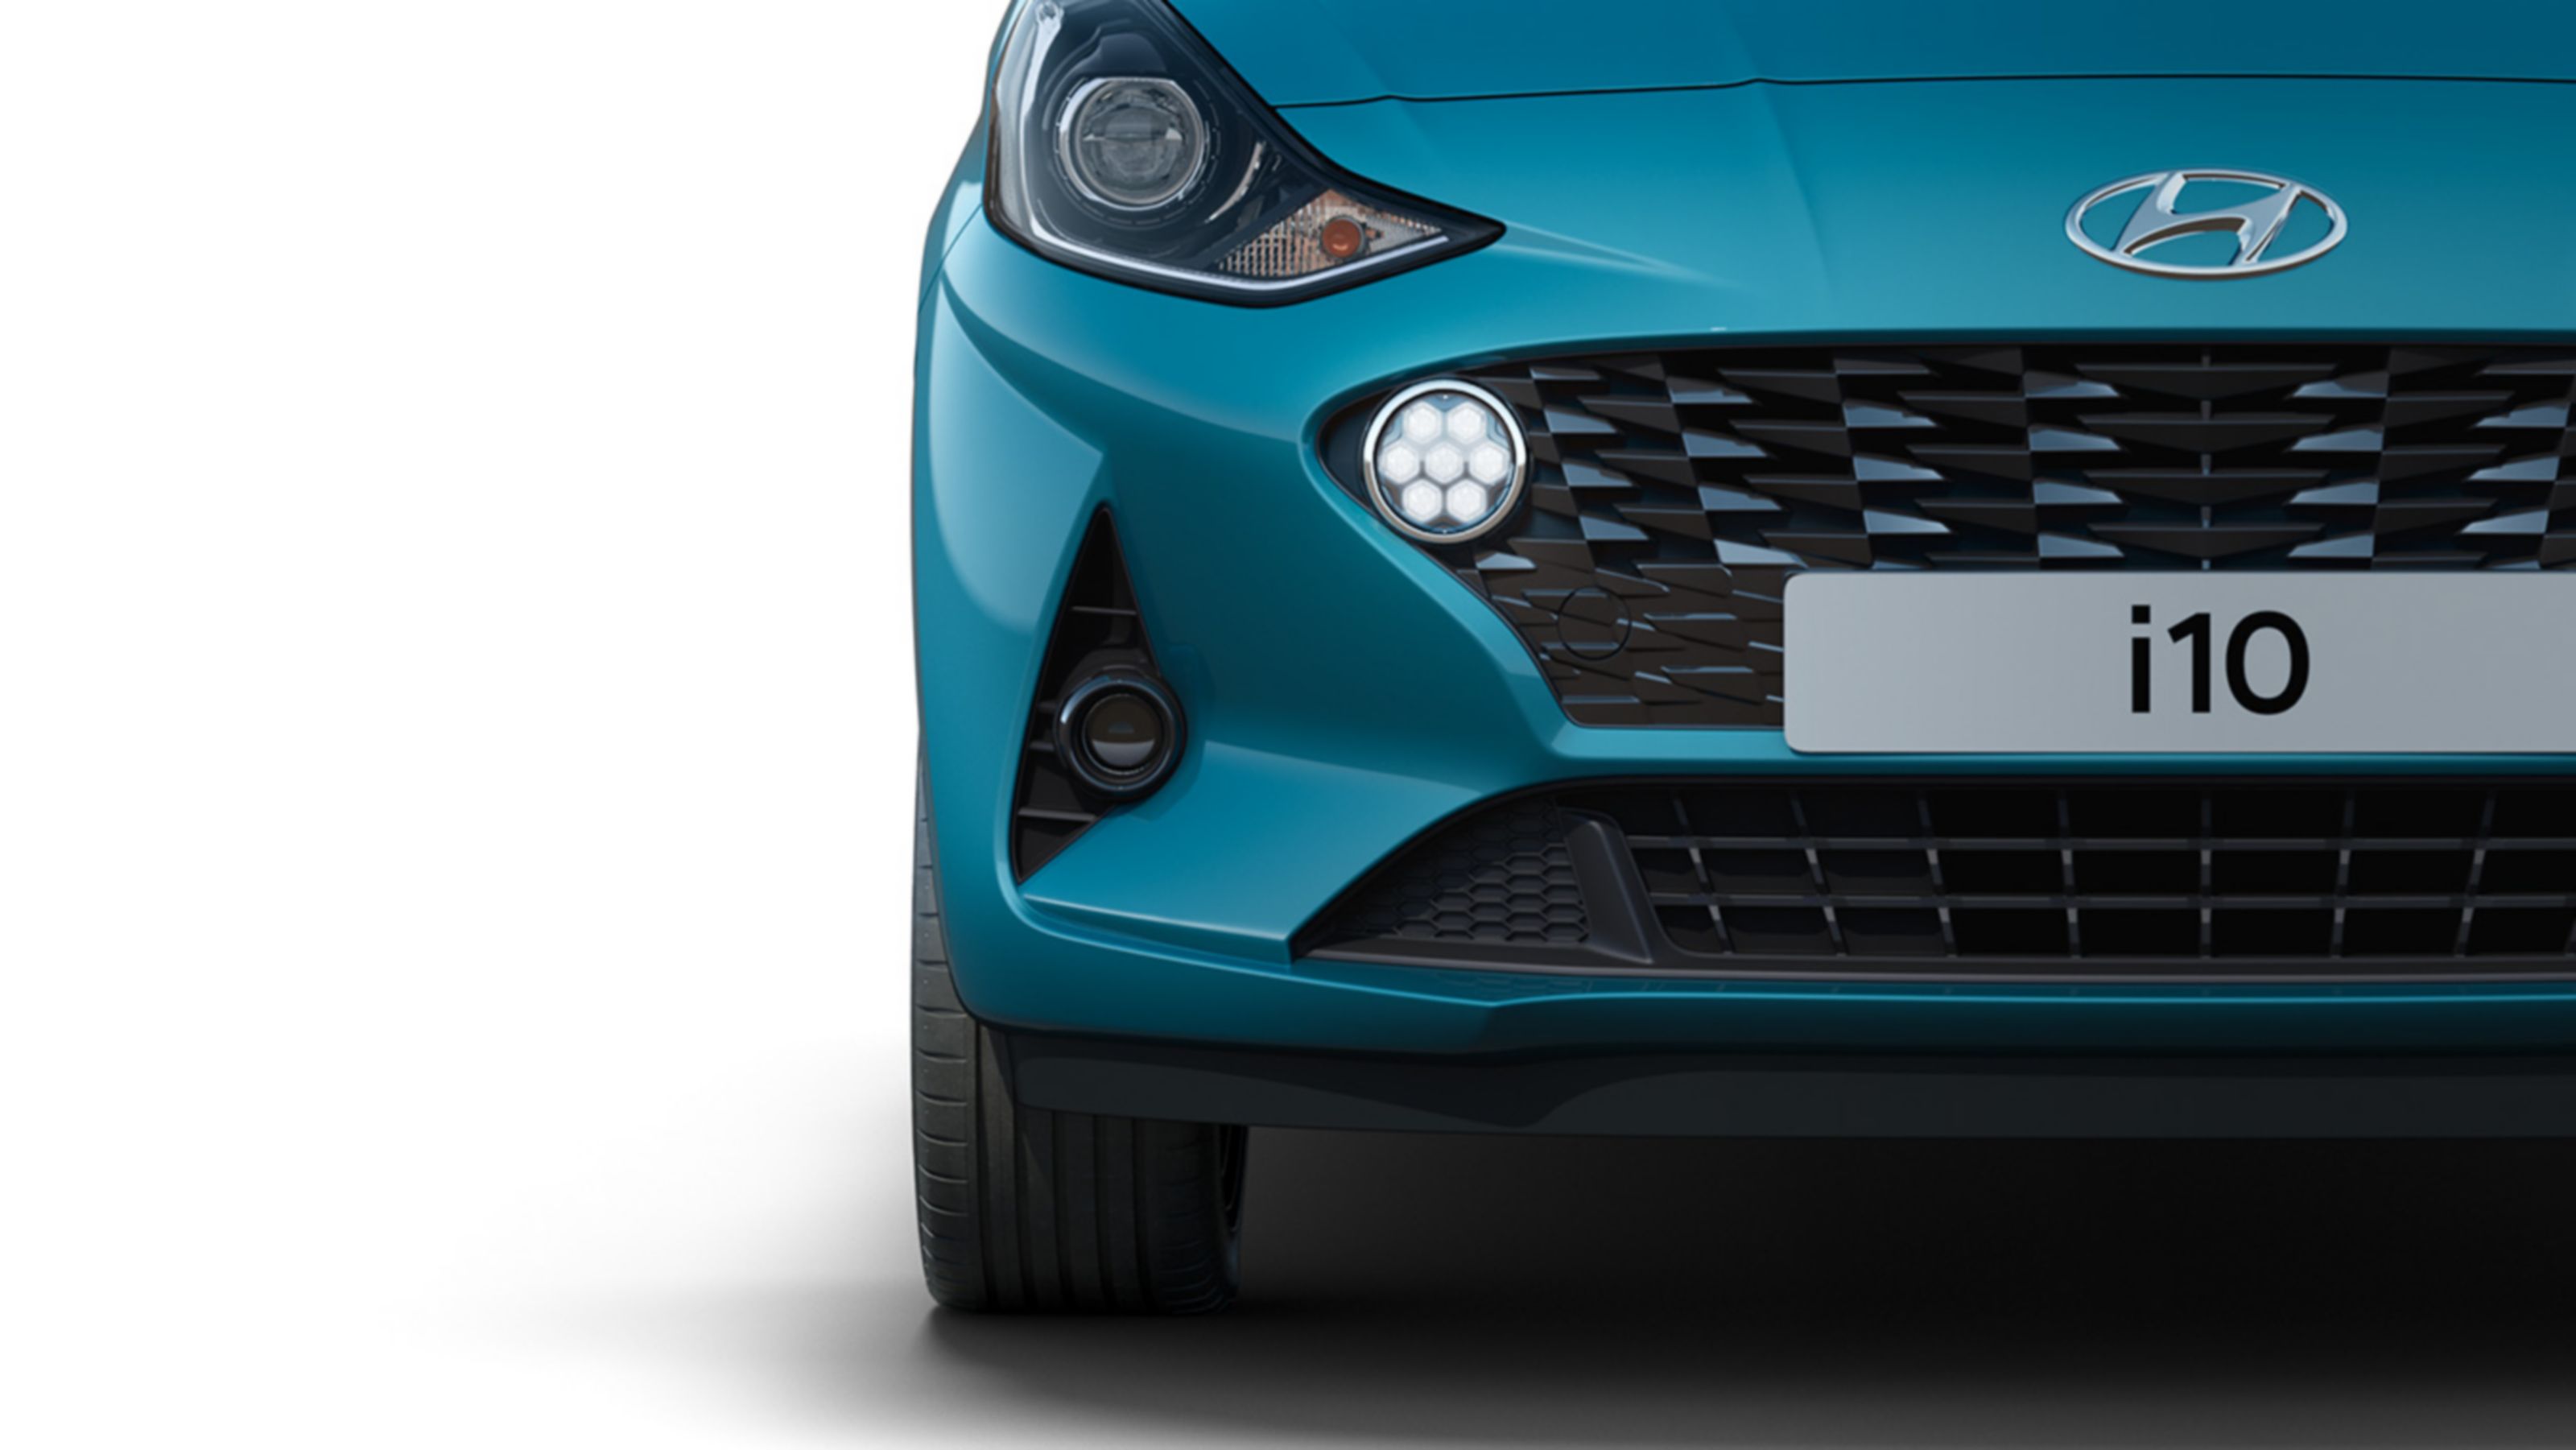 A close up look at the Hyundai i10's Bi-function projection headlamps and LED Daytime Running Lights.  